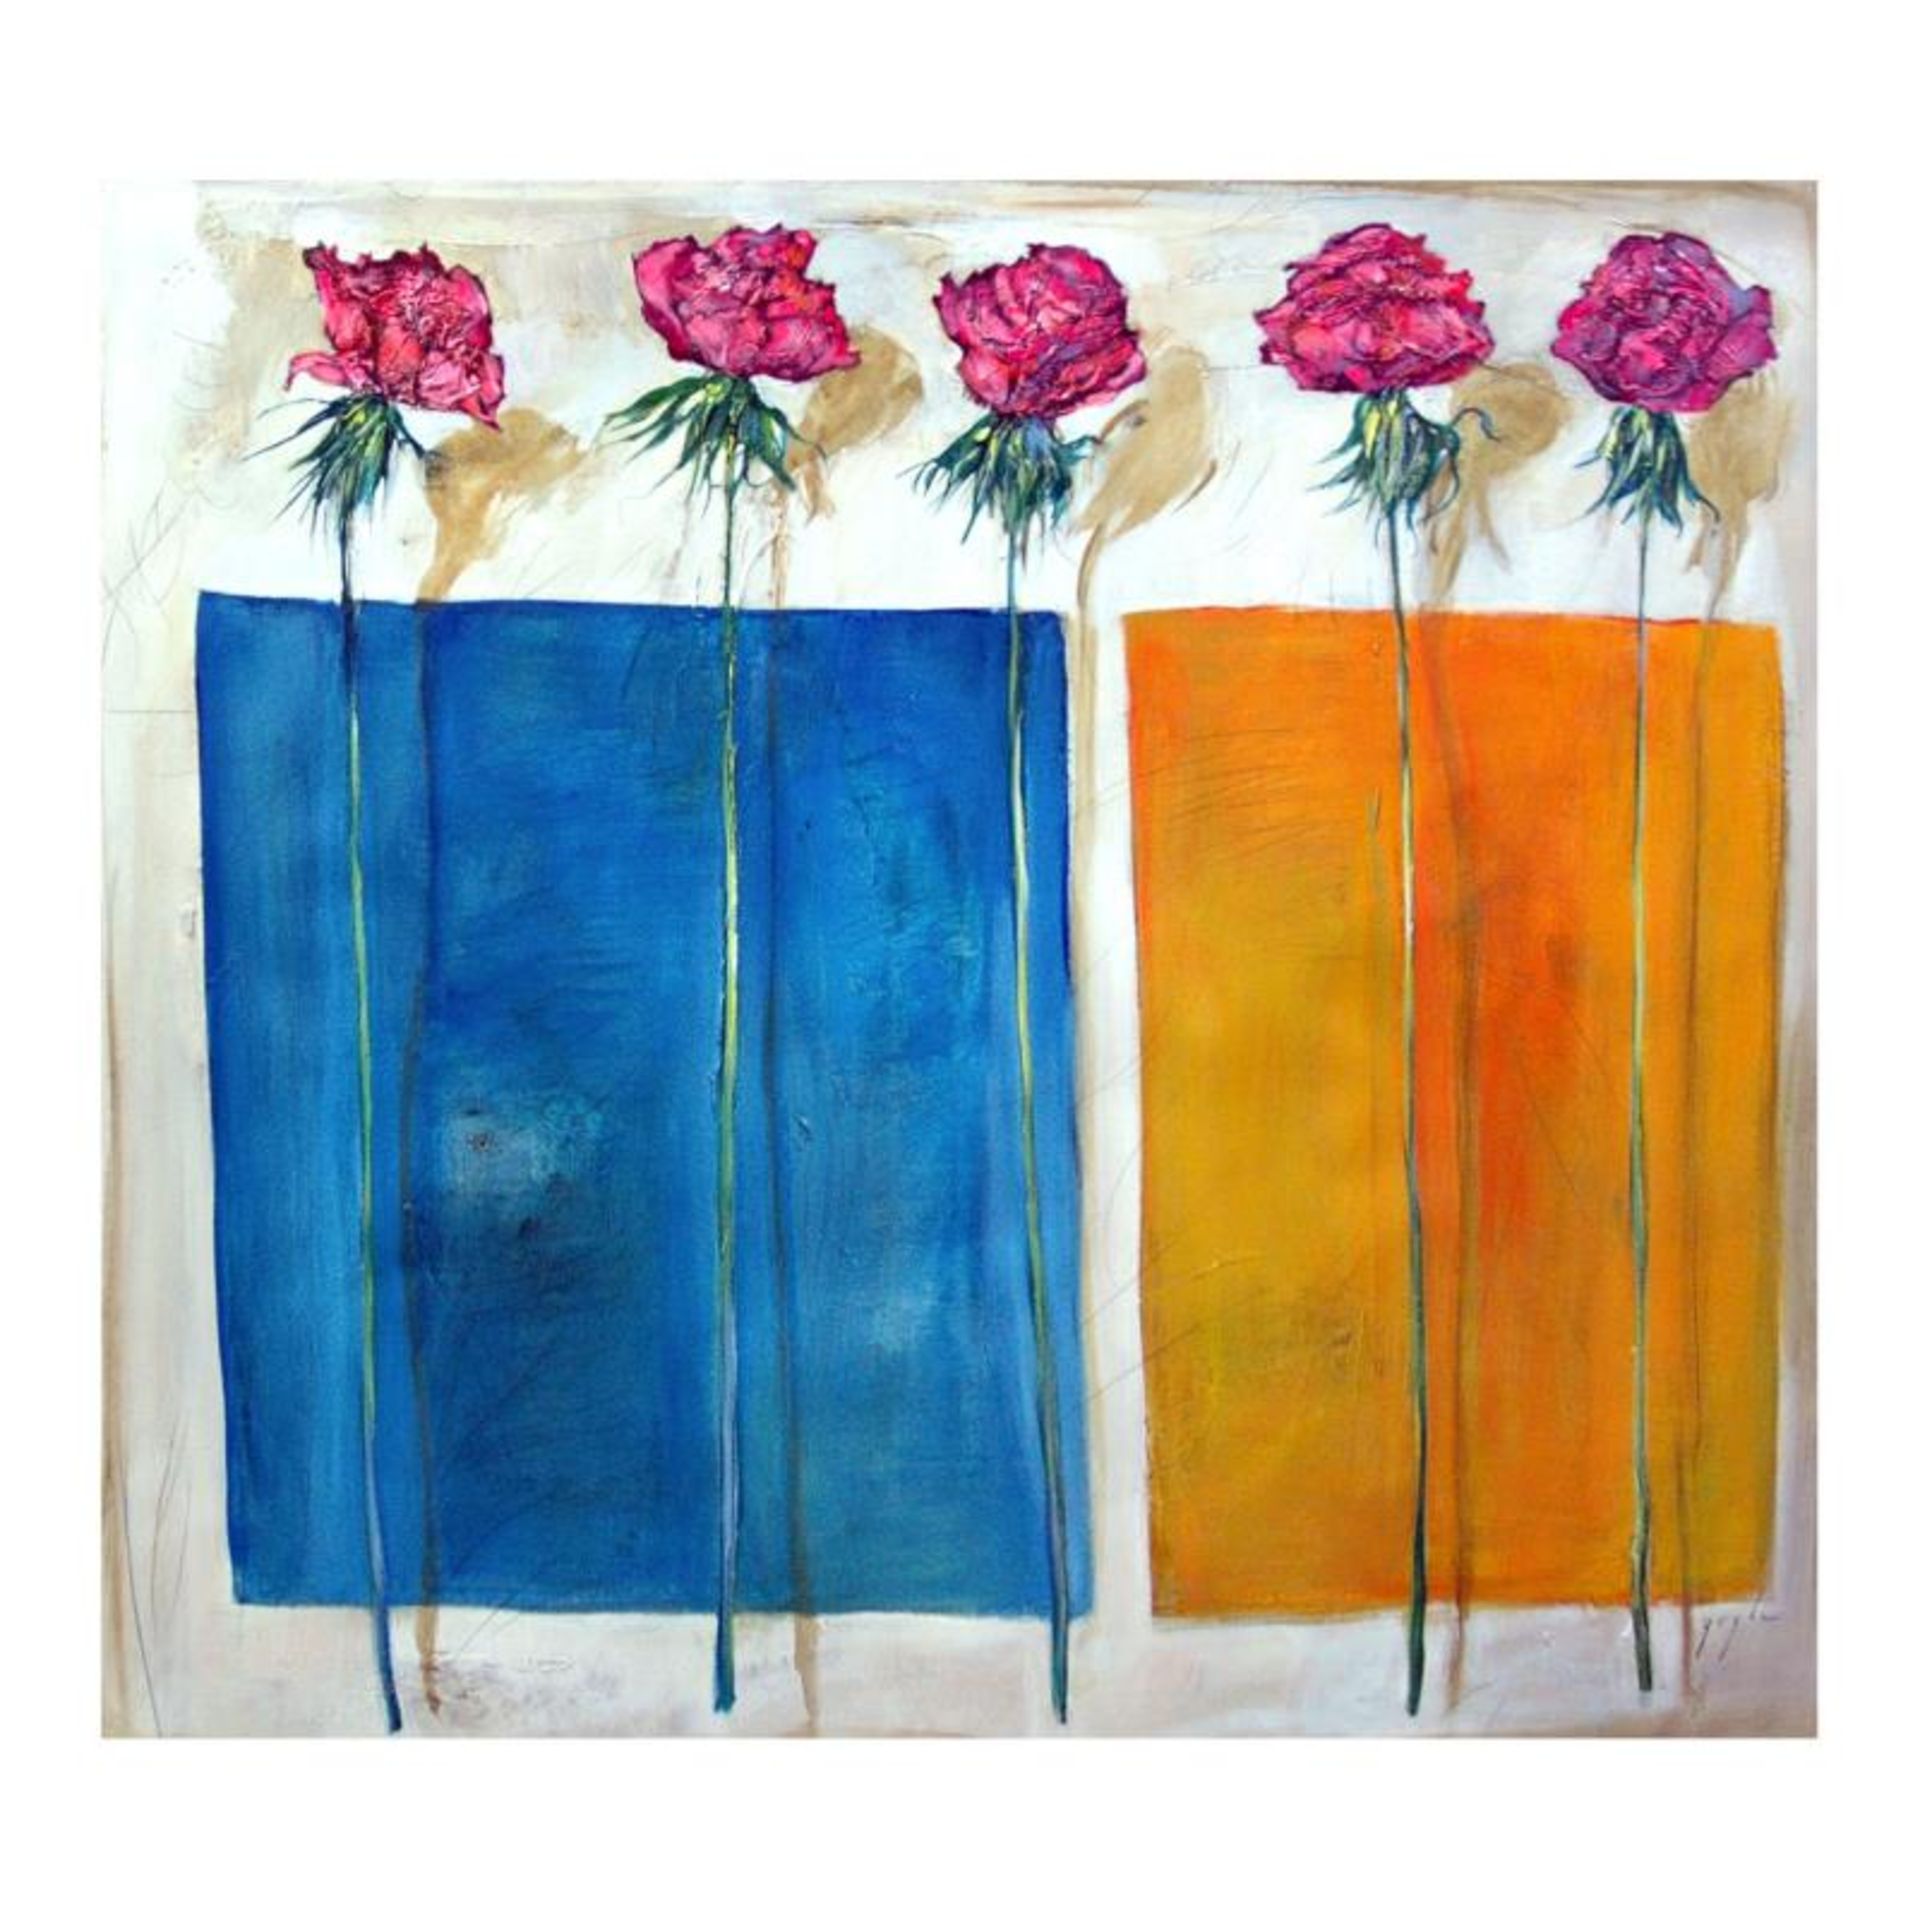 Lenner Gogli, "Coming Up Roses" Limited Edition on Canvas, Numbered and Hand Sig